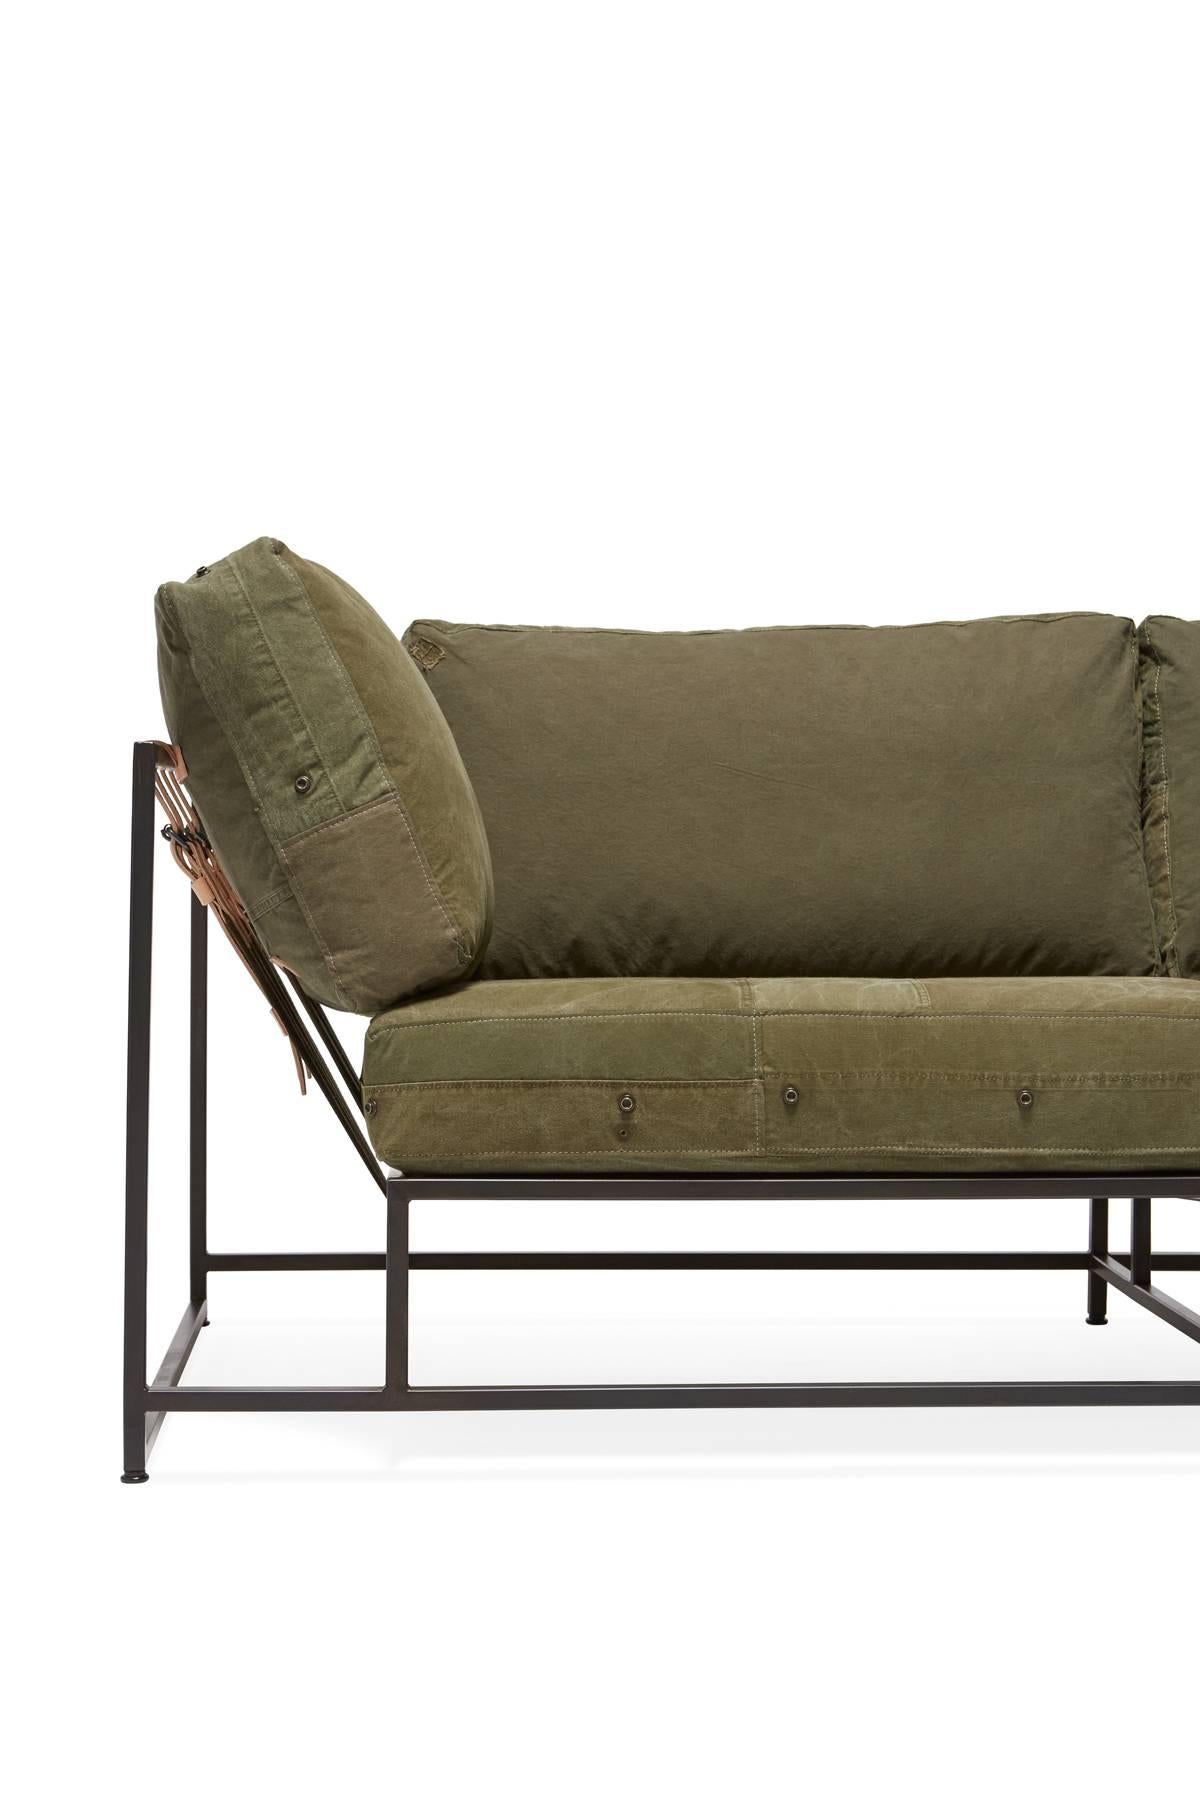 Modern Vintage Military Canvas and Blackened Steel Two Seat Sofa V1 For Sale